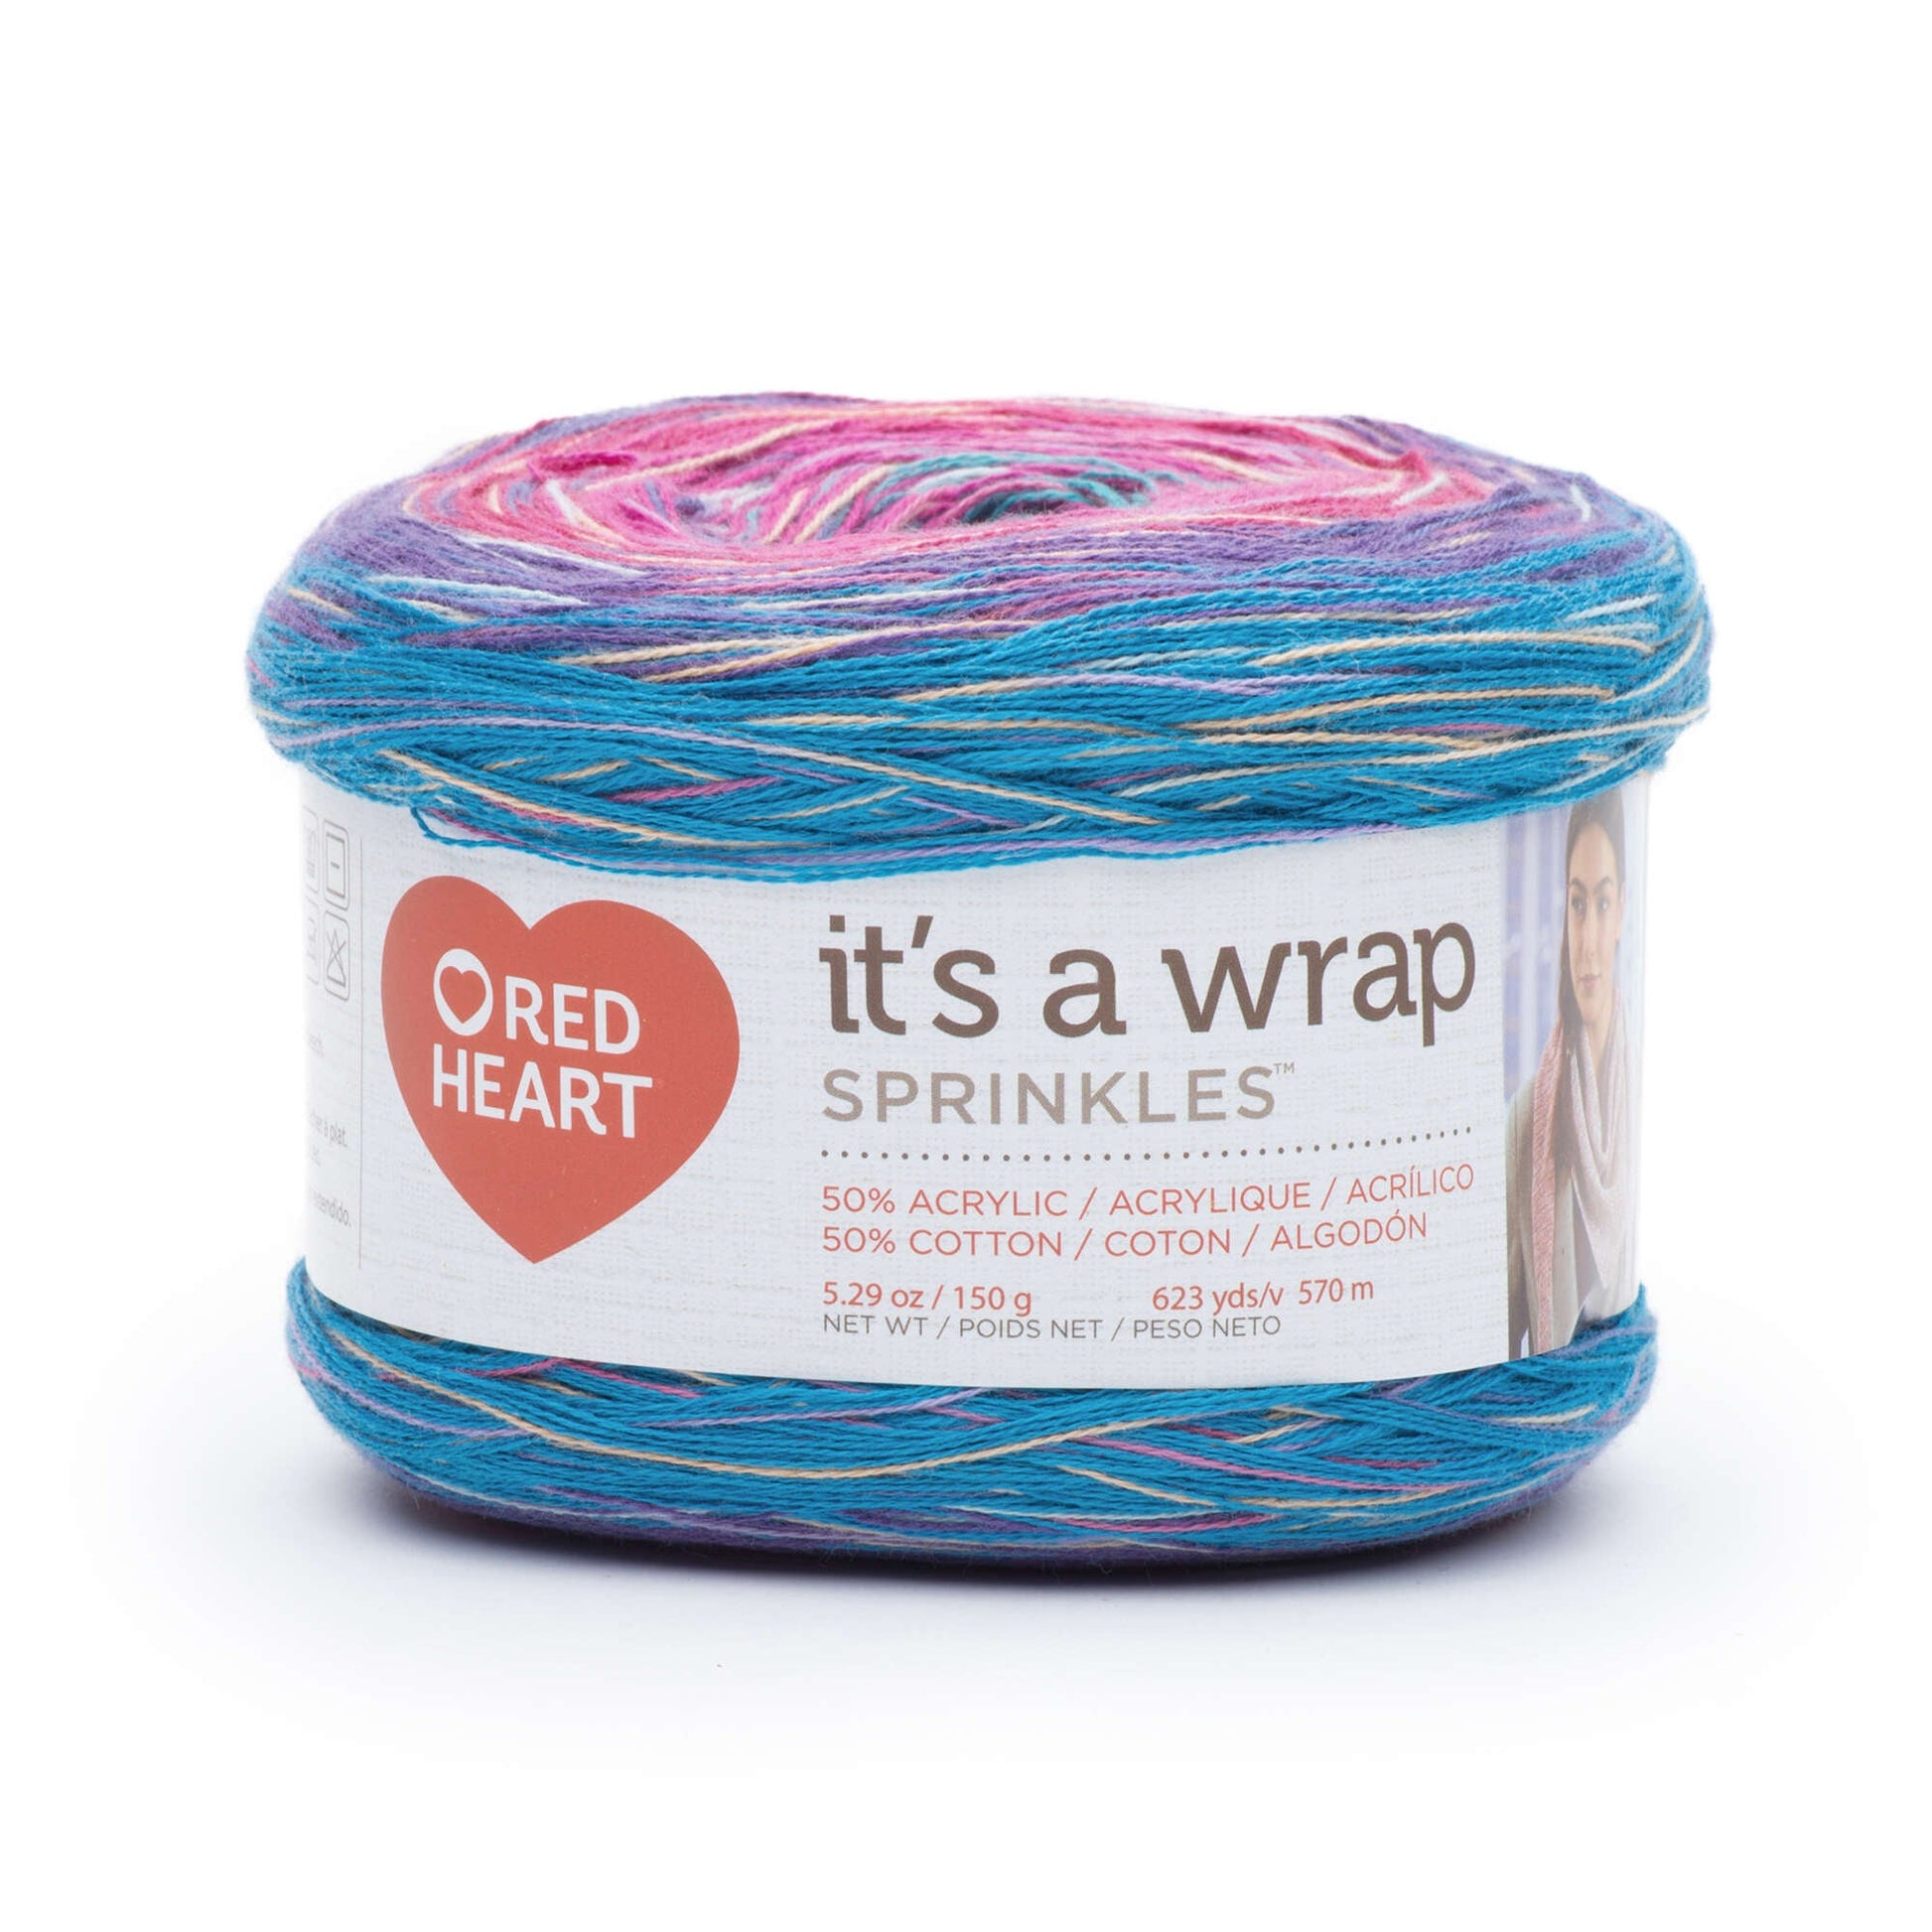 Red Heart It's a Wrap Sprinkles Yarn - Discontinued shades